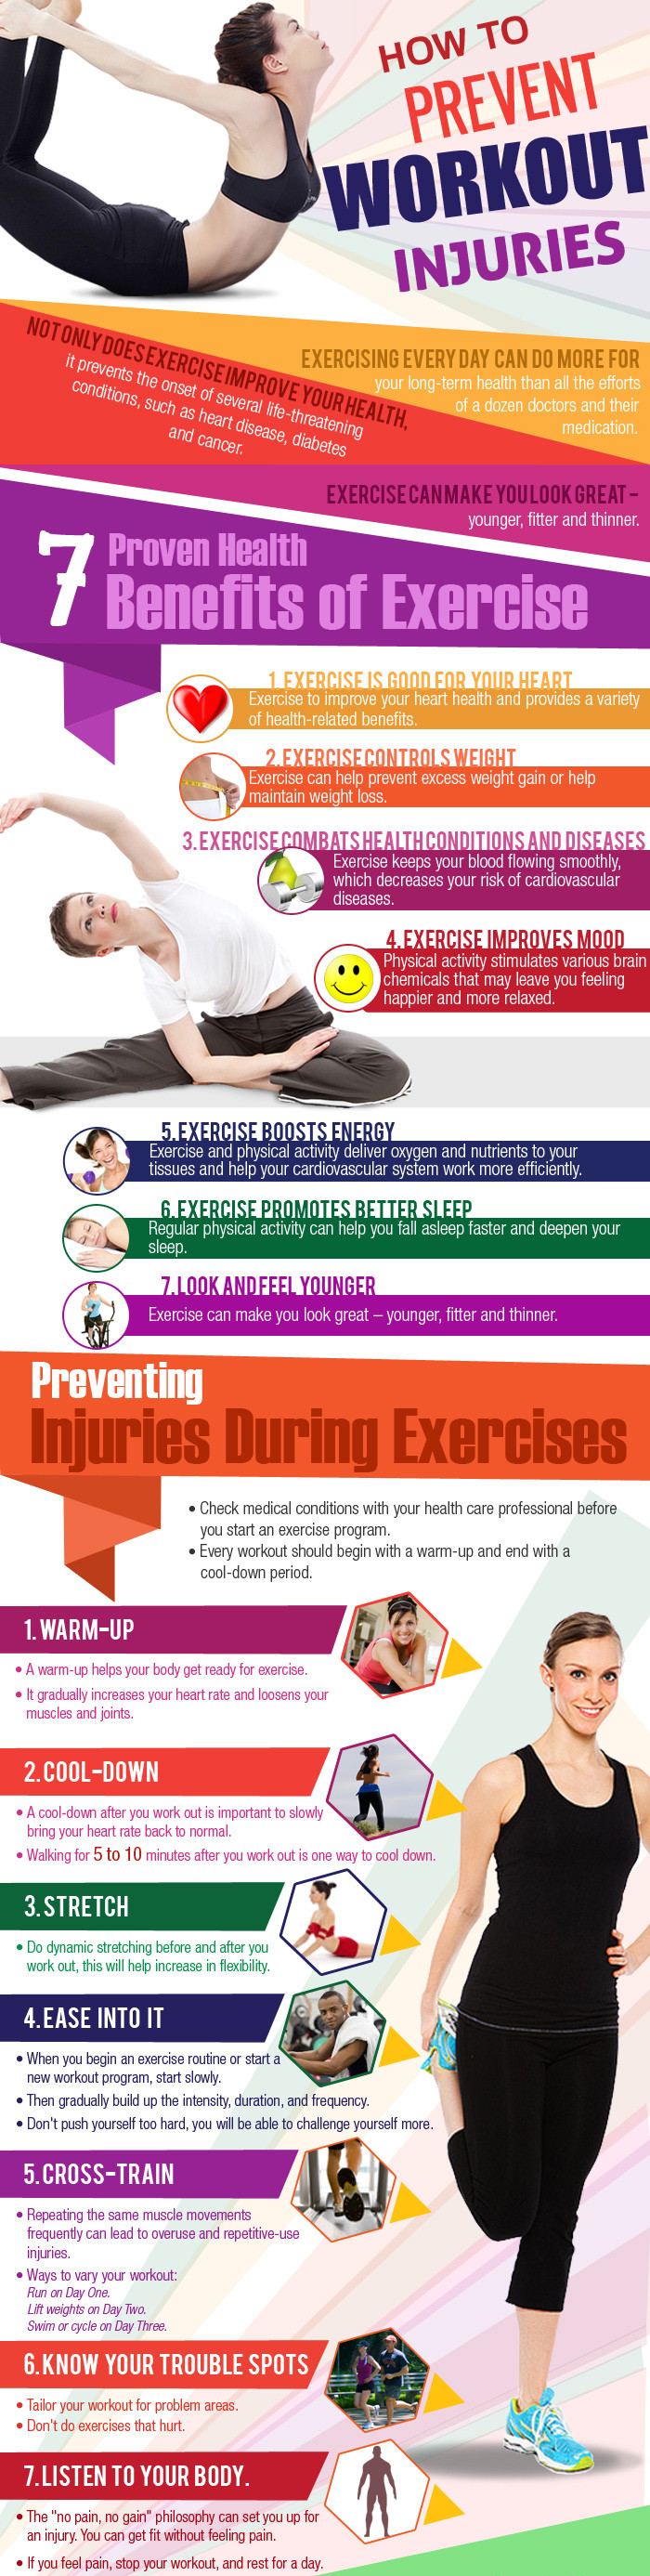 Five Tips to Prevent Injuries While Exercising | Physio in Ottawa